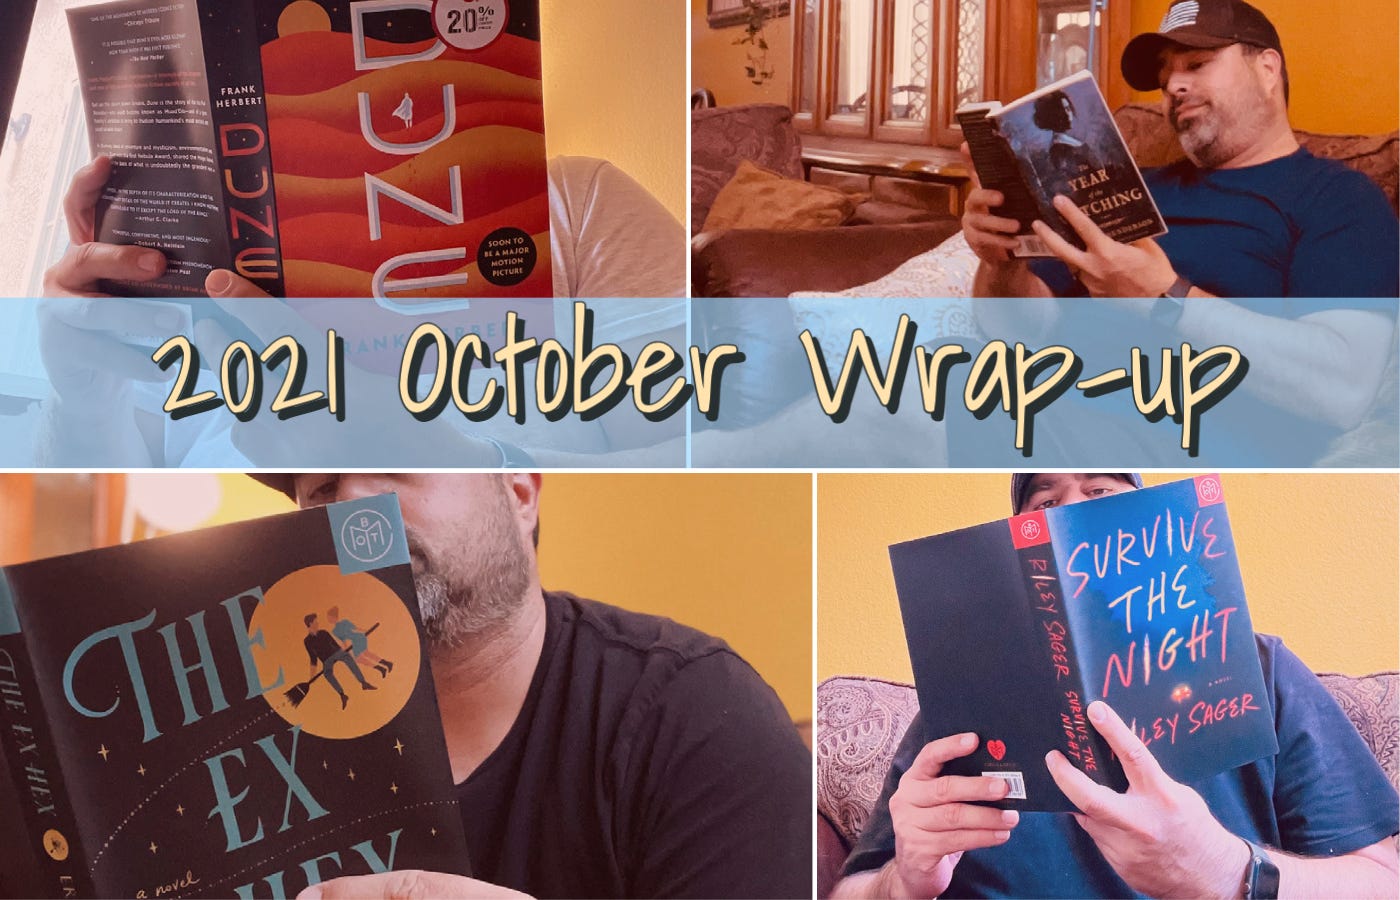 Cory Goodwin’s 2021 October Wrap-up